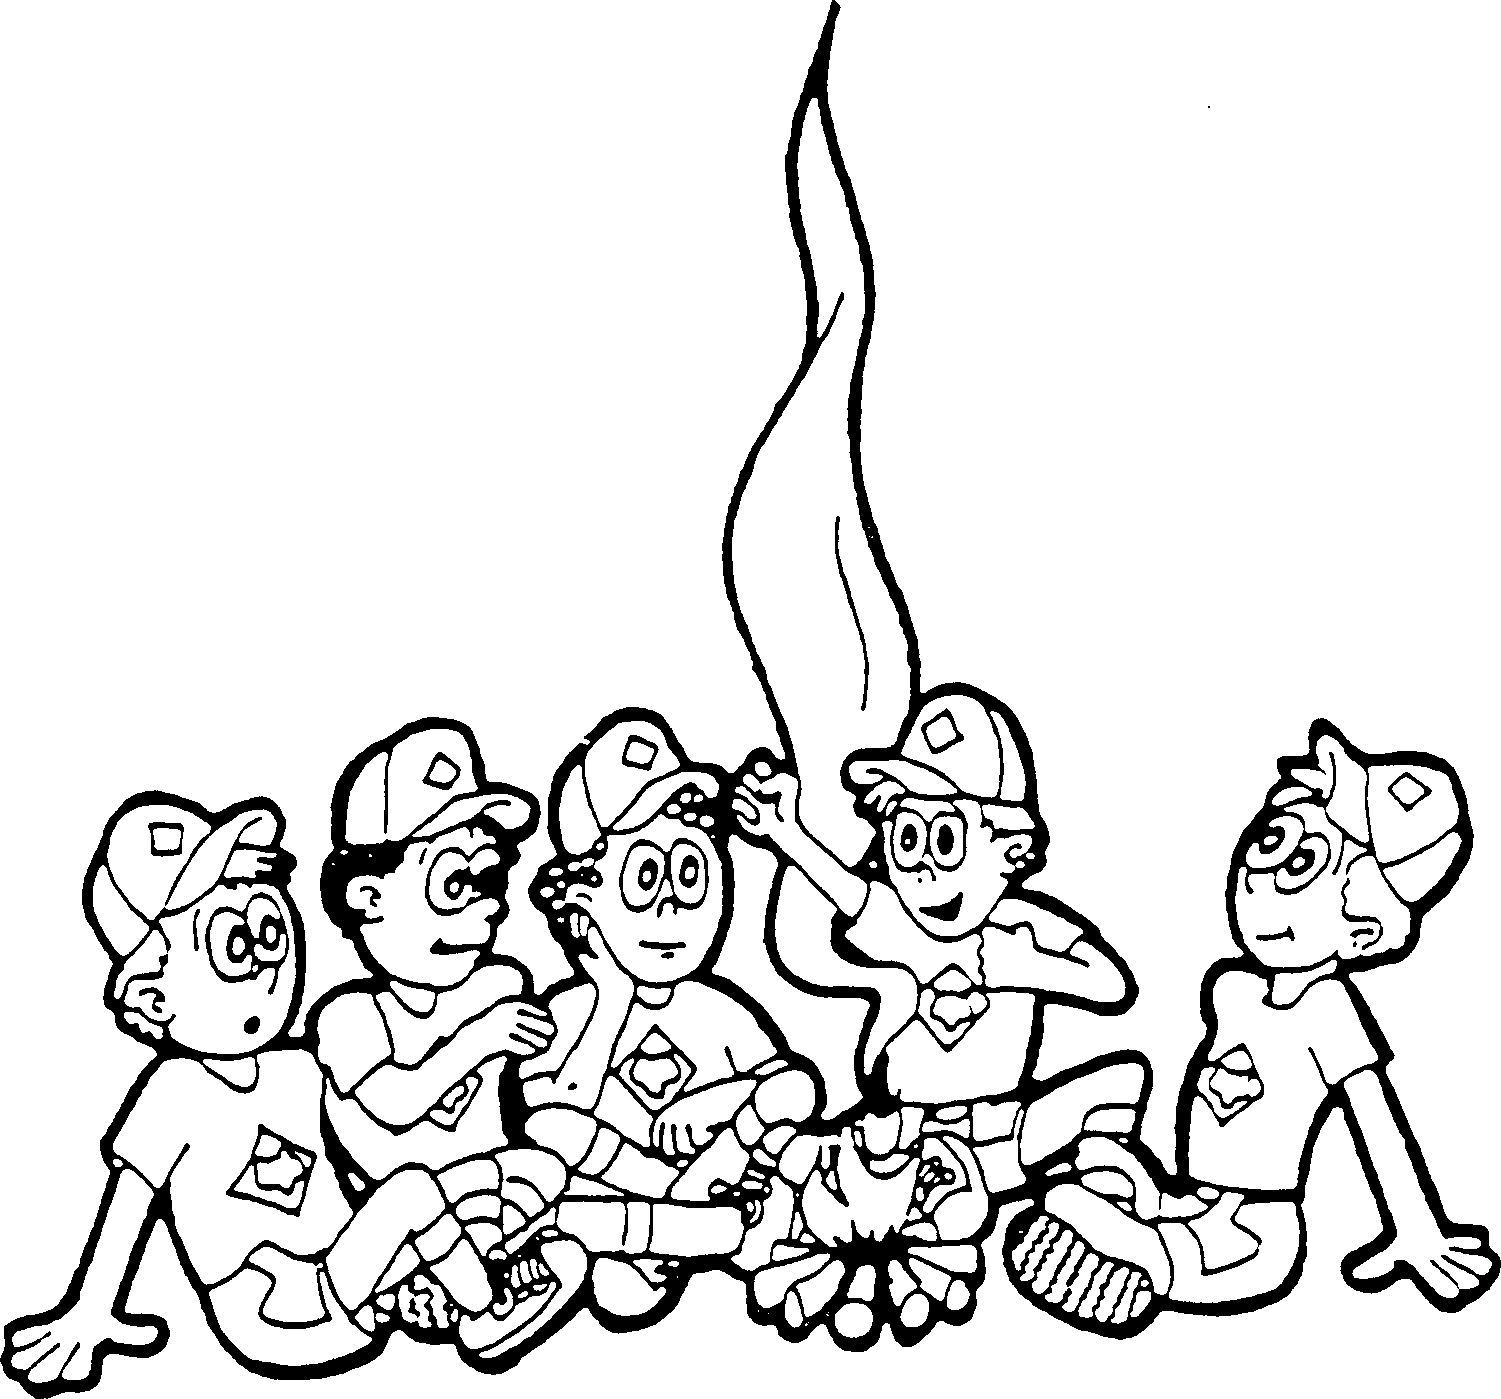 scout camping clipart black and white